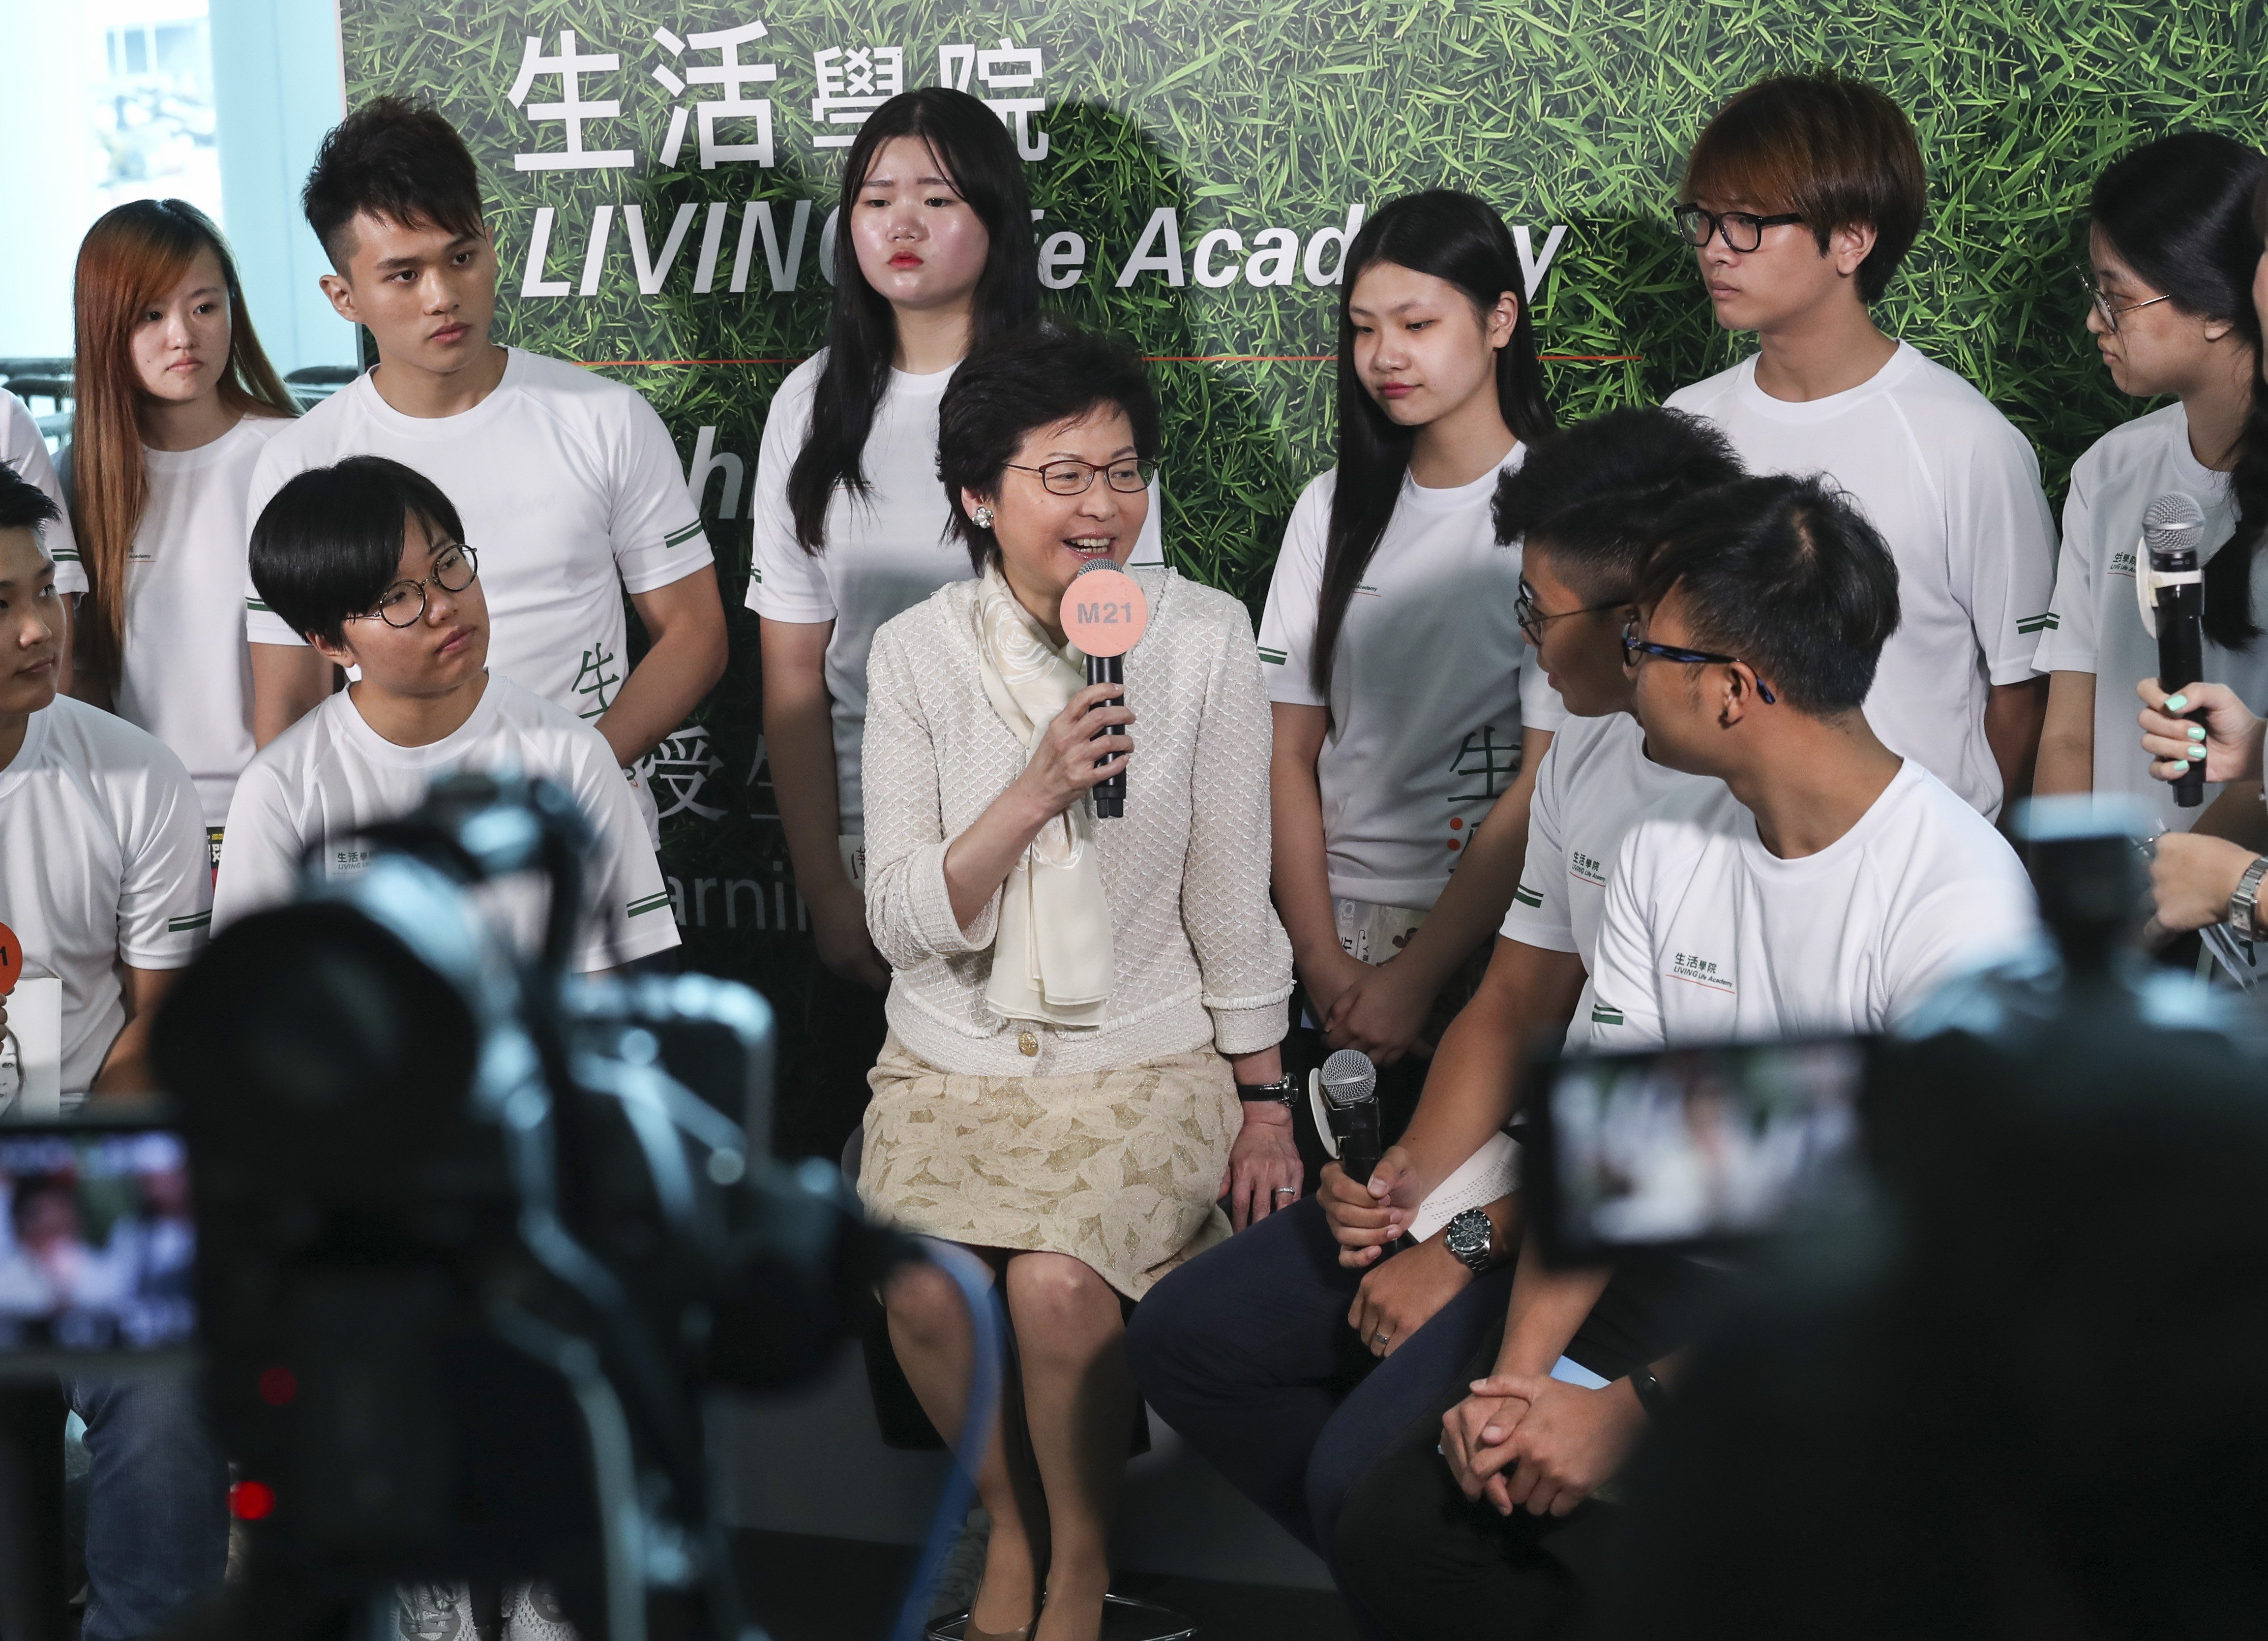 Chief Executive Carrie Lam, seen here in July 2017, has reached out to youths but the recent protests show it has not been enough. Photo: Nora Tam